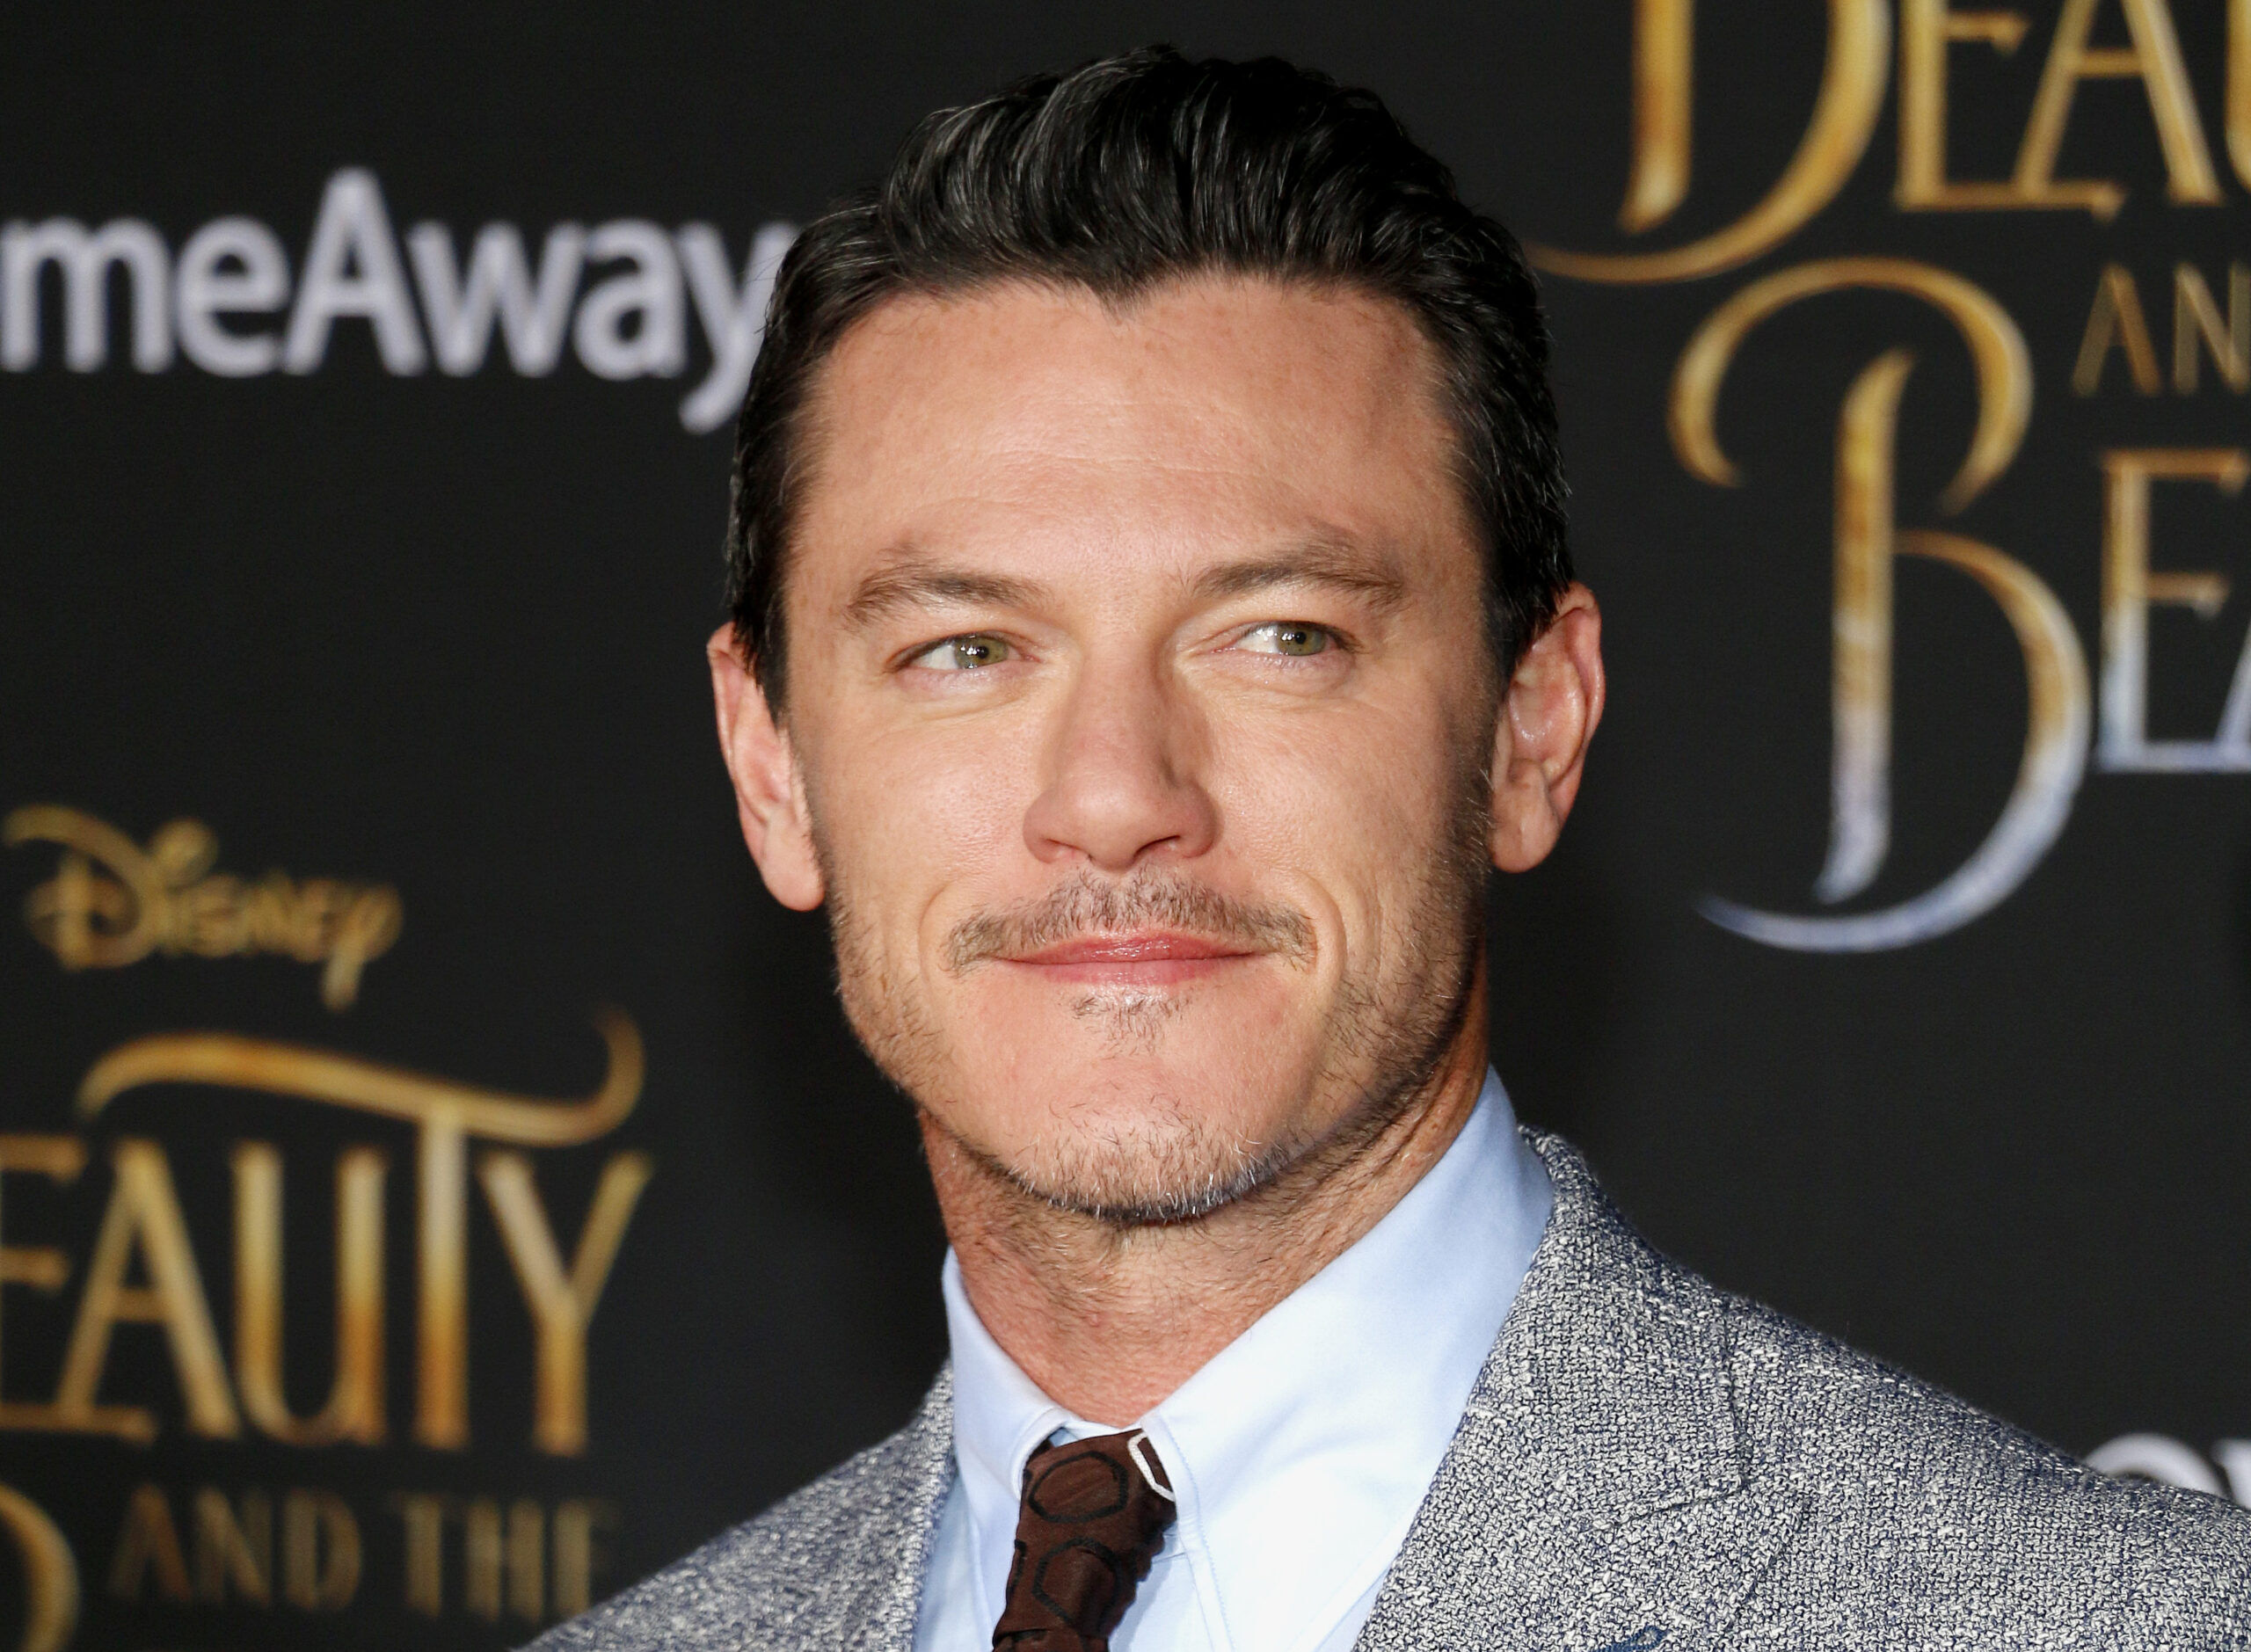 Out actor Luke Evans addresses rumors he could play a gay James Bond